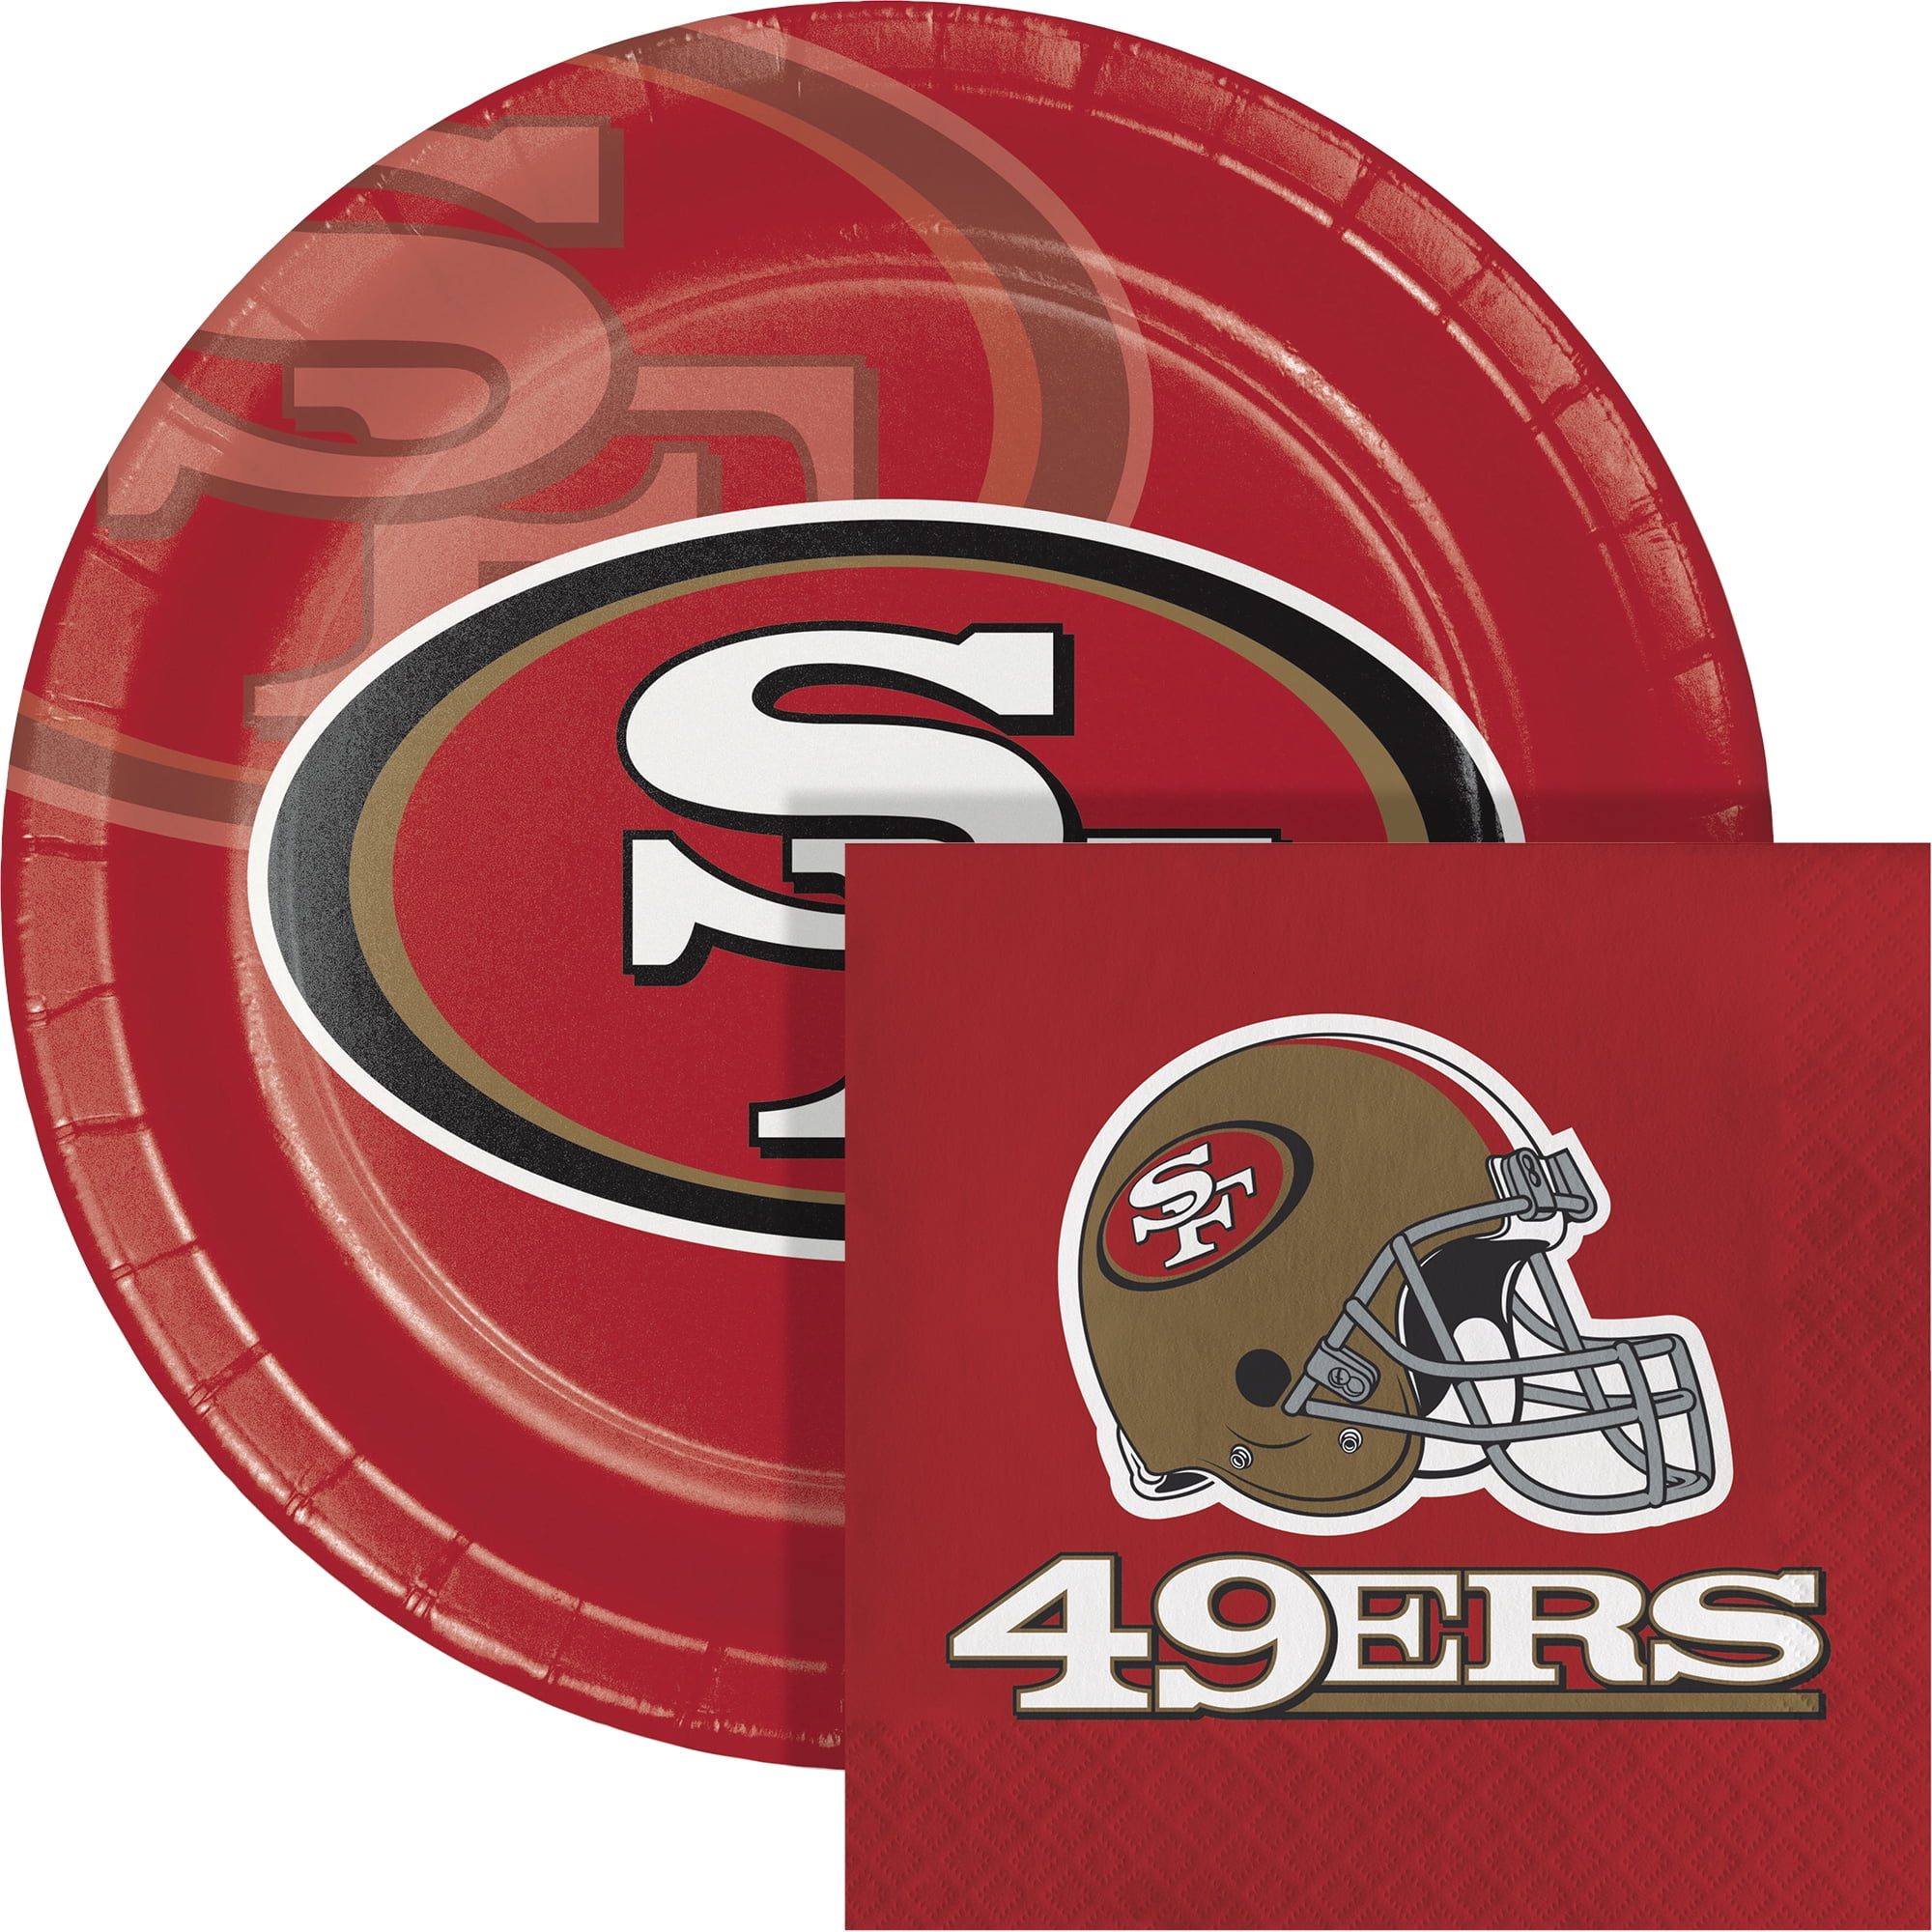 NFL San Francisco 49ers 9' Paper Plate and 6.5' Napkin Party Kit 48 Count